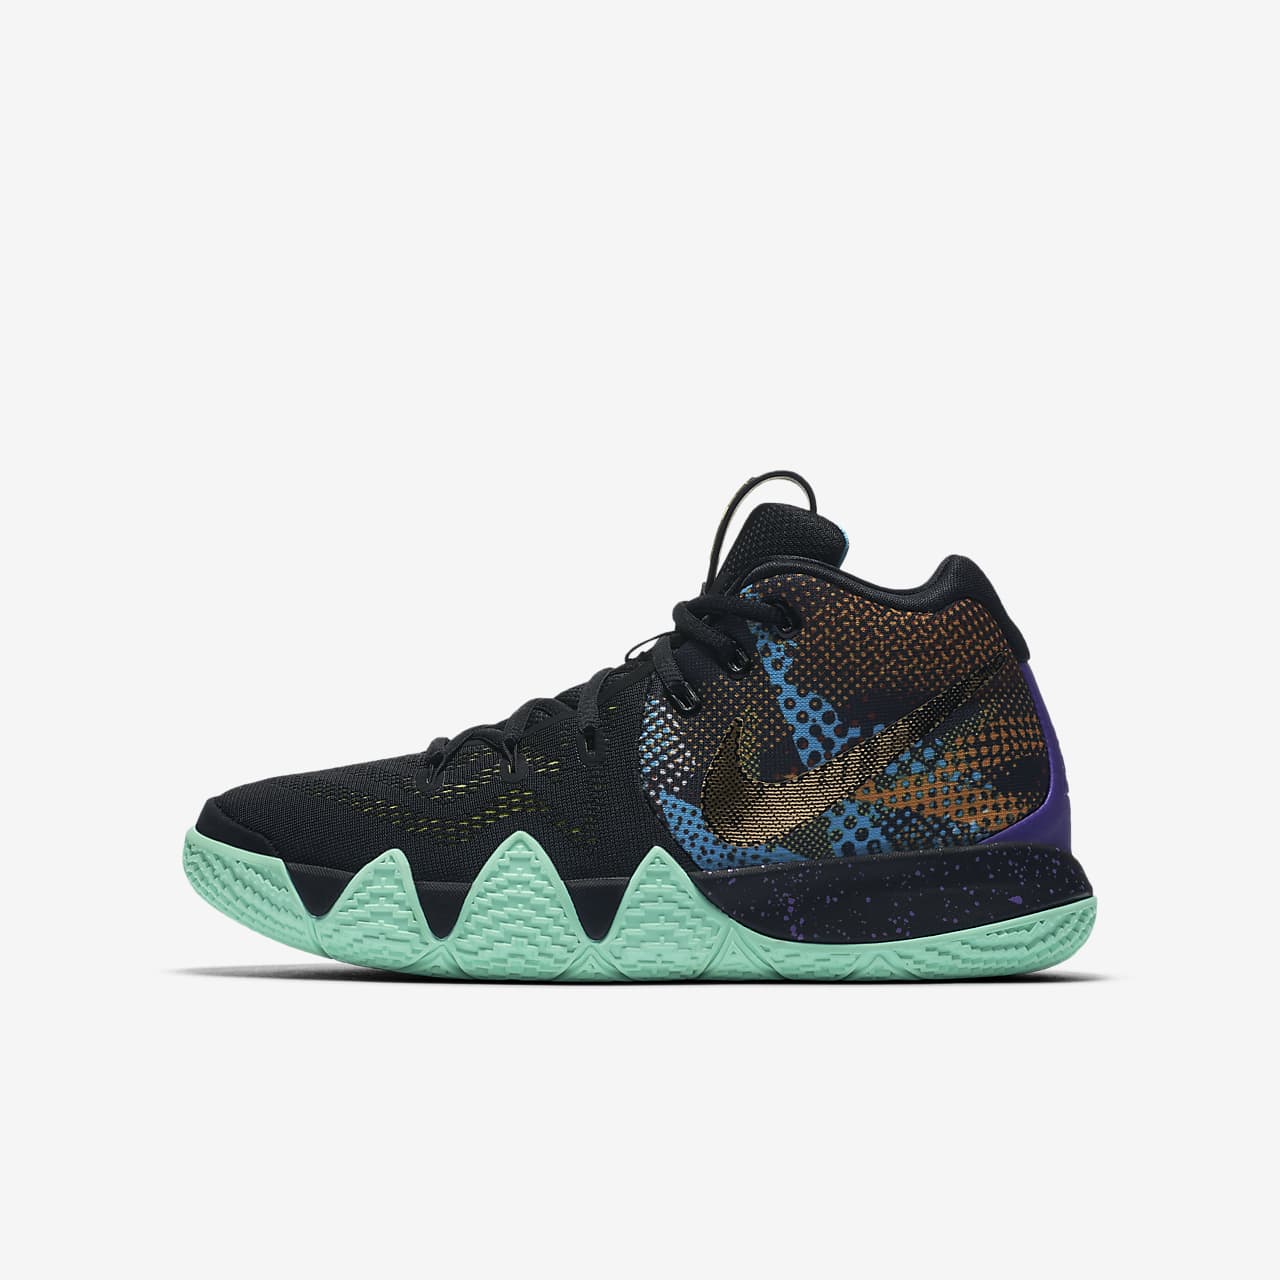 kyrie 4 shoes youth